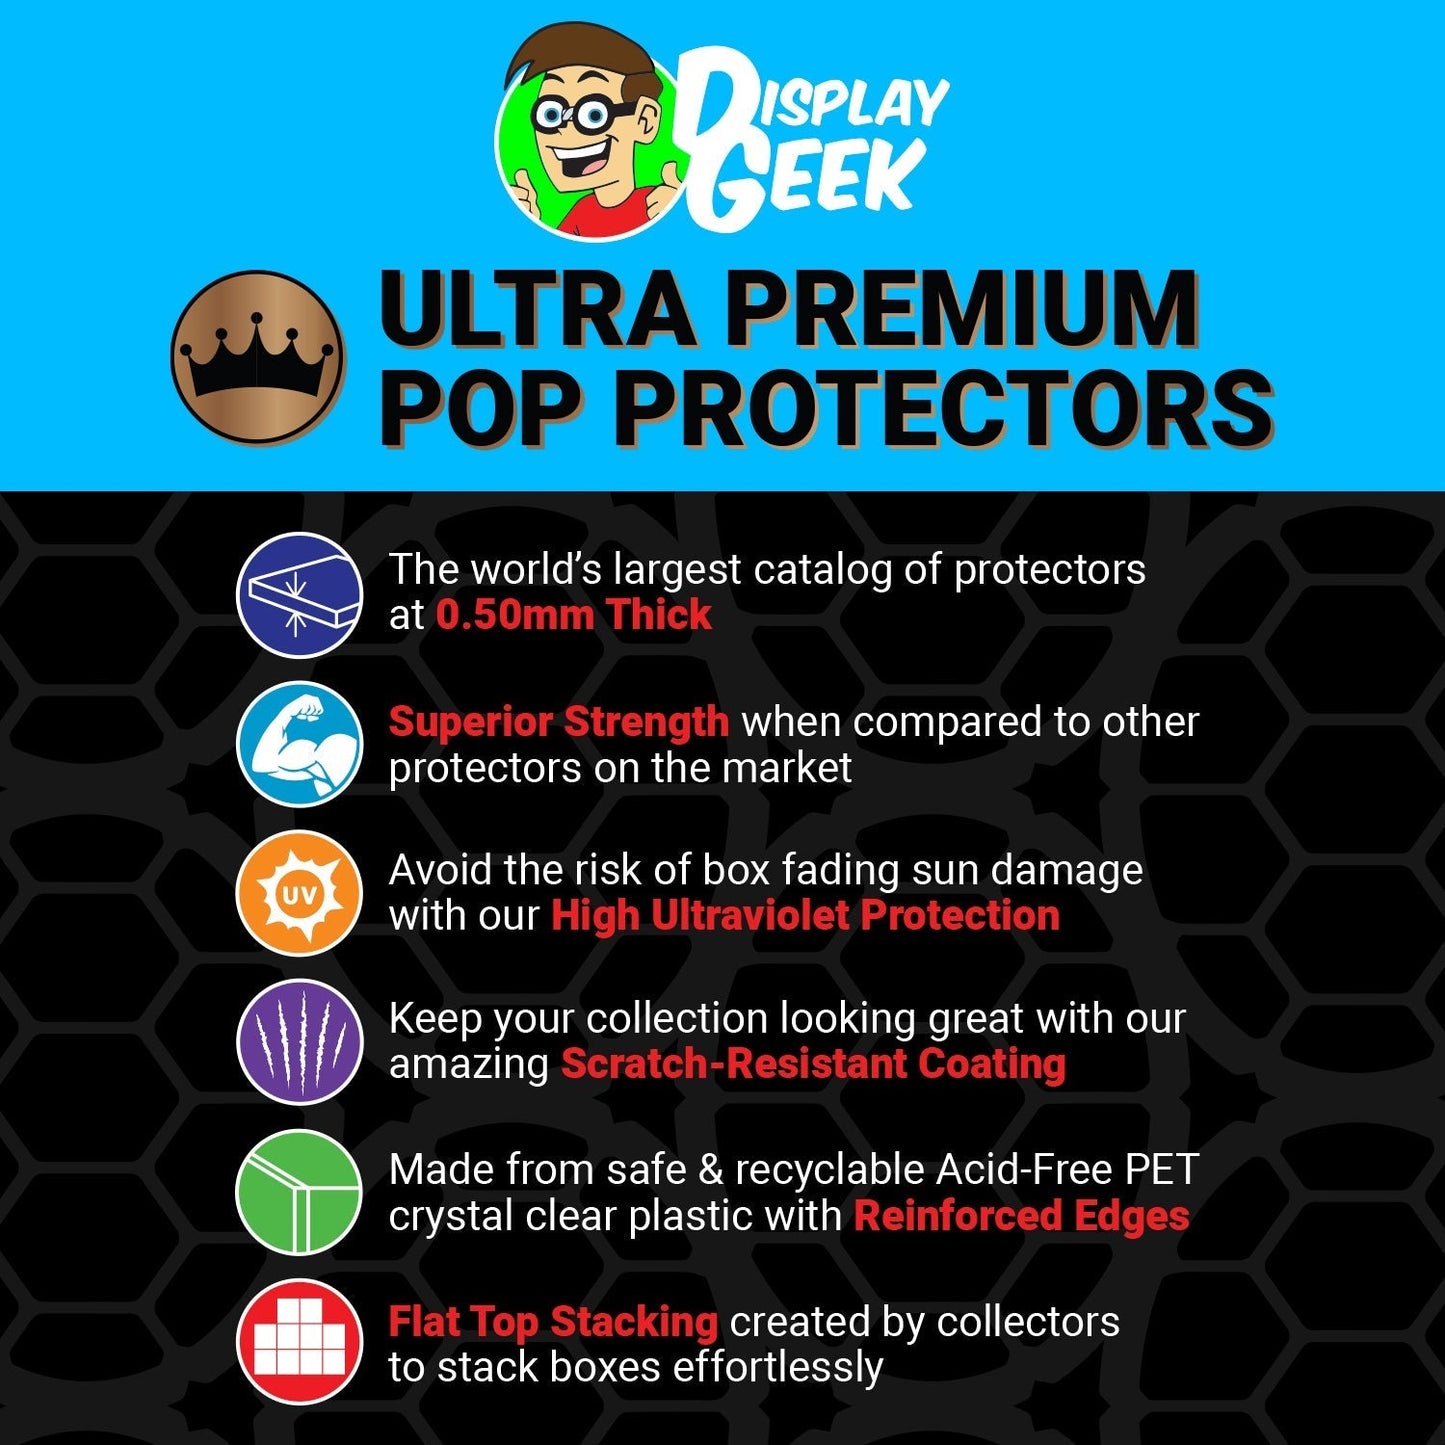 Pop Protector for Batman Arkham Asylum #10 Funko Pop Game Covers - PPG Pop Protector Guide Search Created by Display Geek